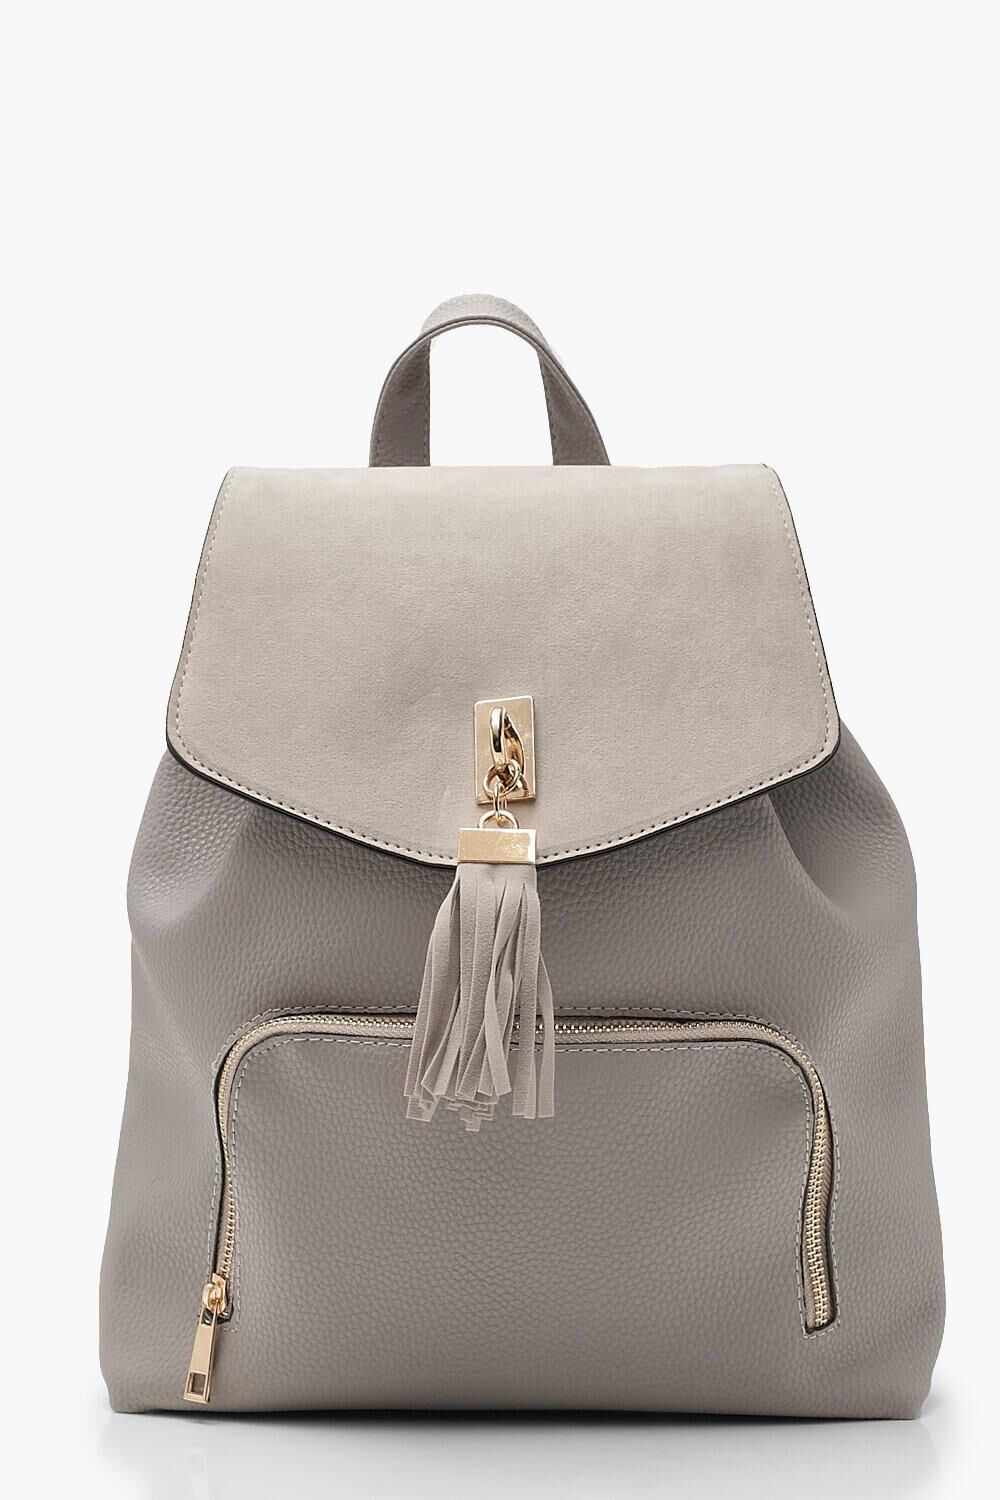 Boohoo Suedette Tassel Trim Backpack- Grey  - Size: ONE SIZE